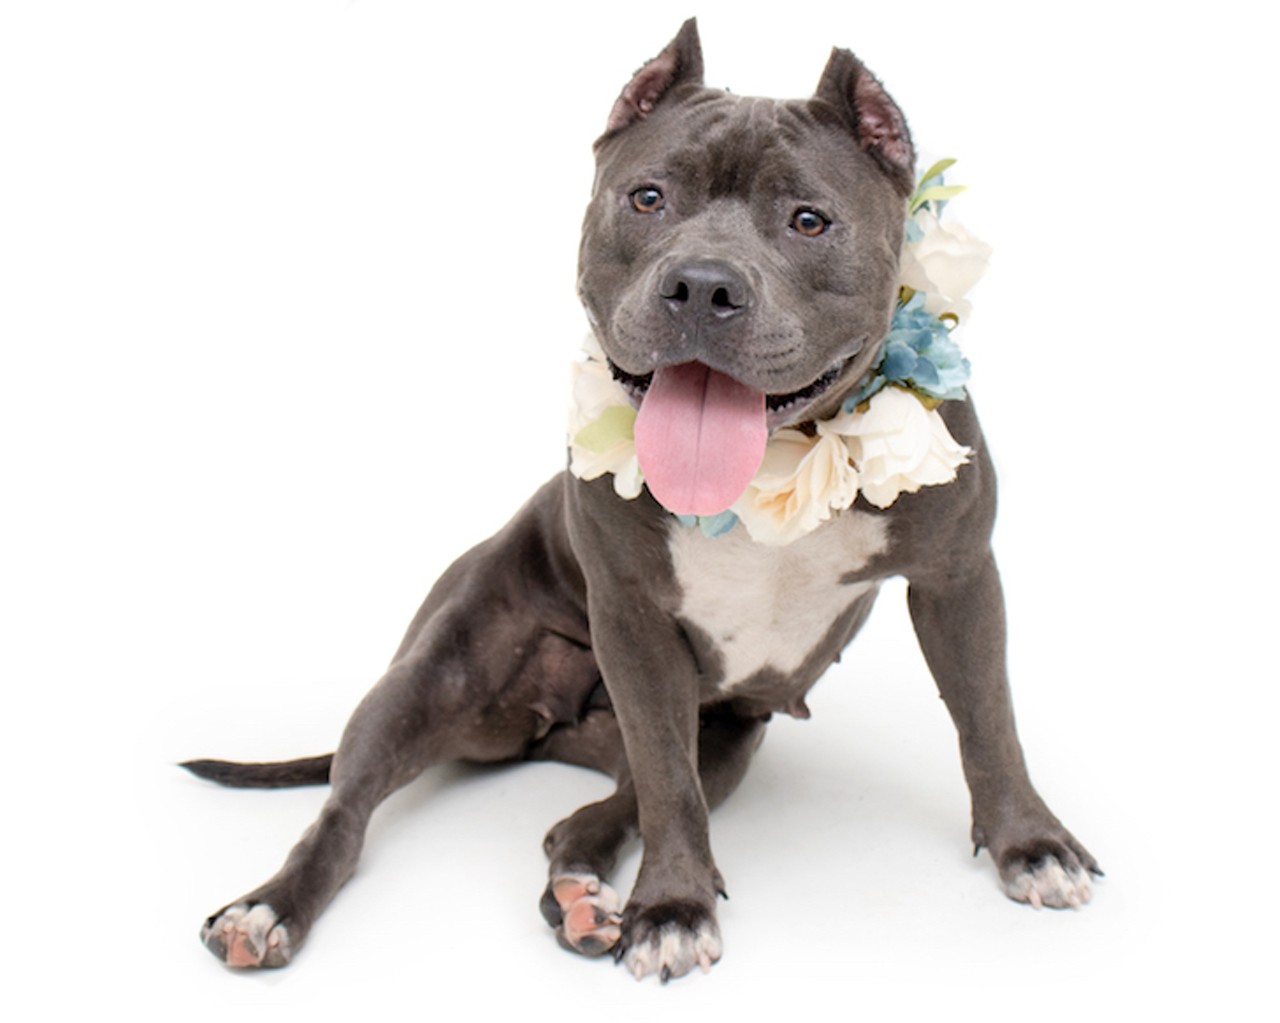 14 adoptable dogs ready to be your new BFF at Orange County Animal Services